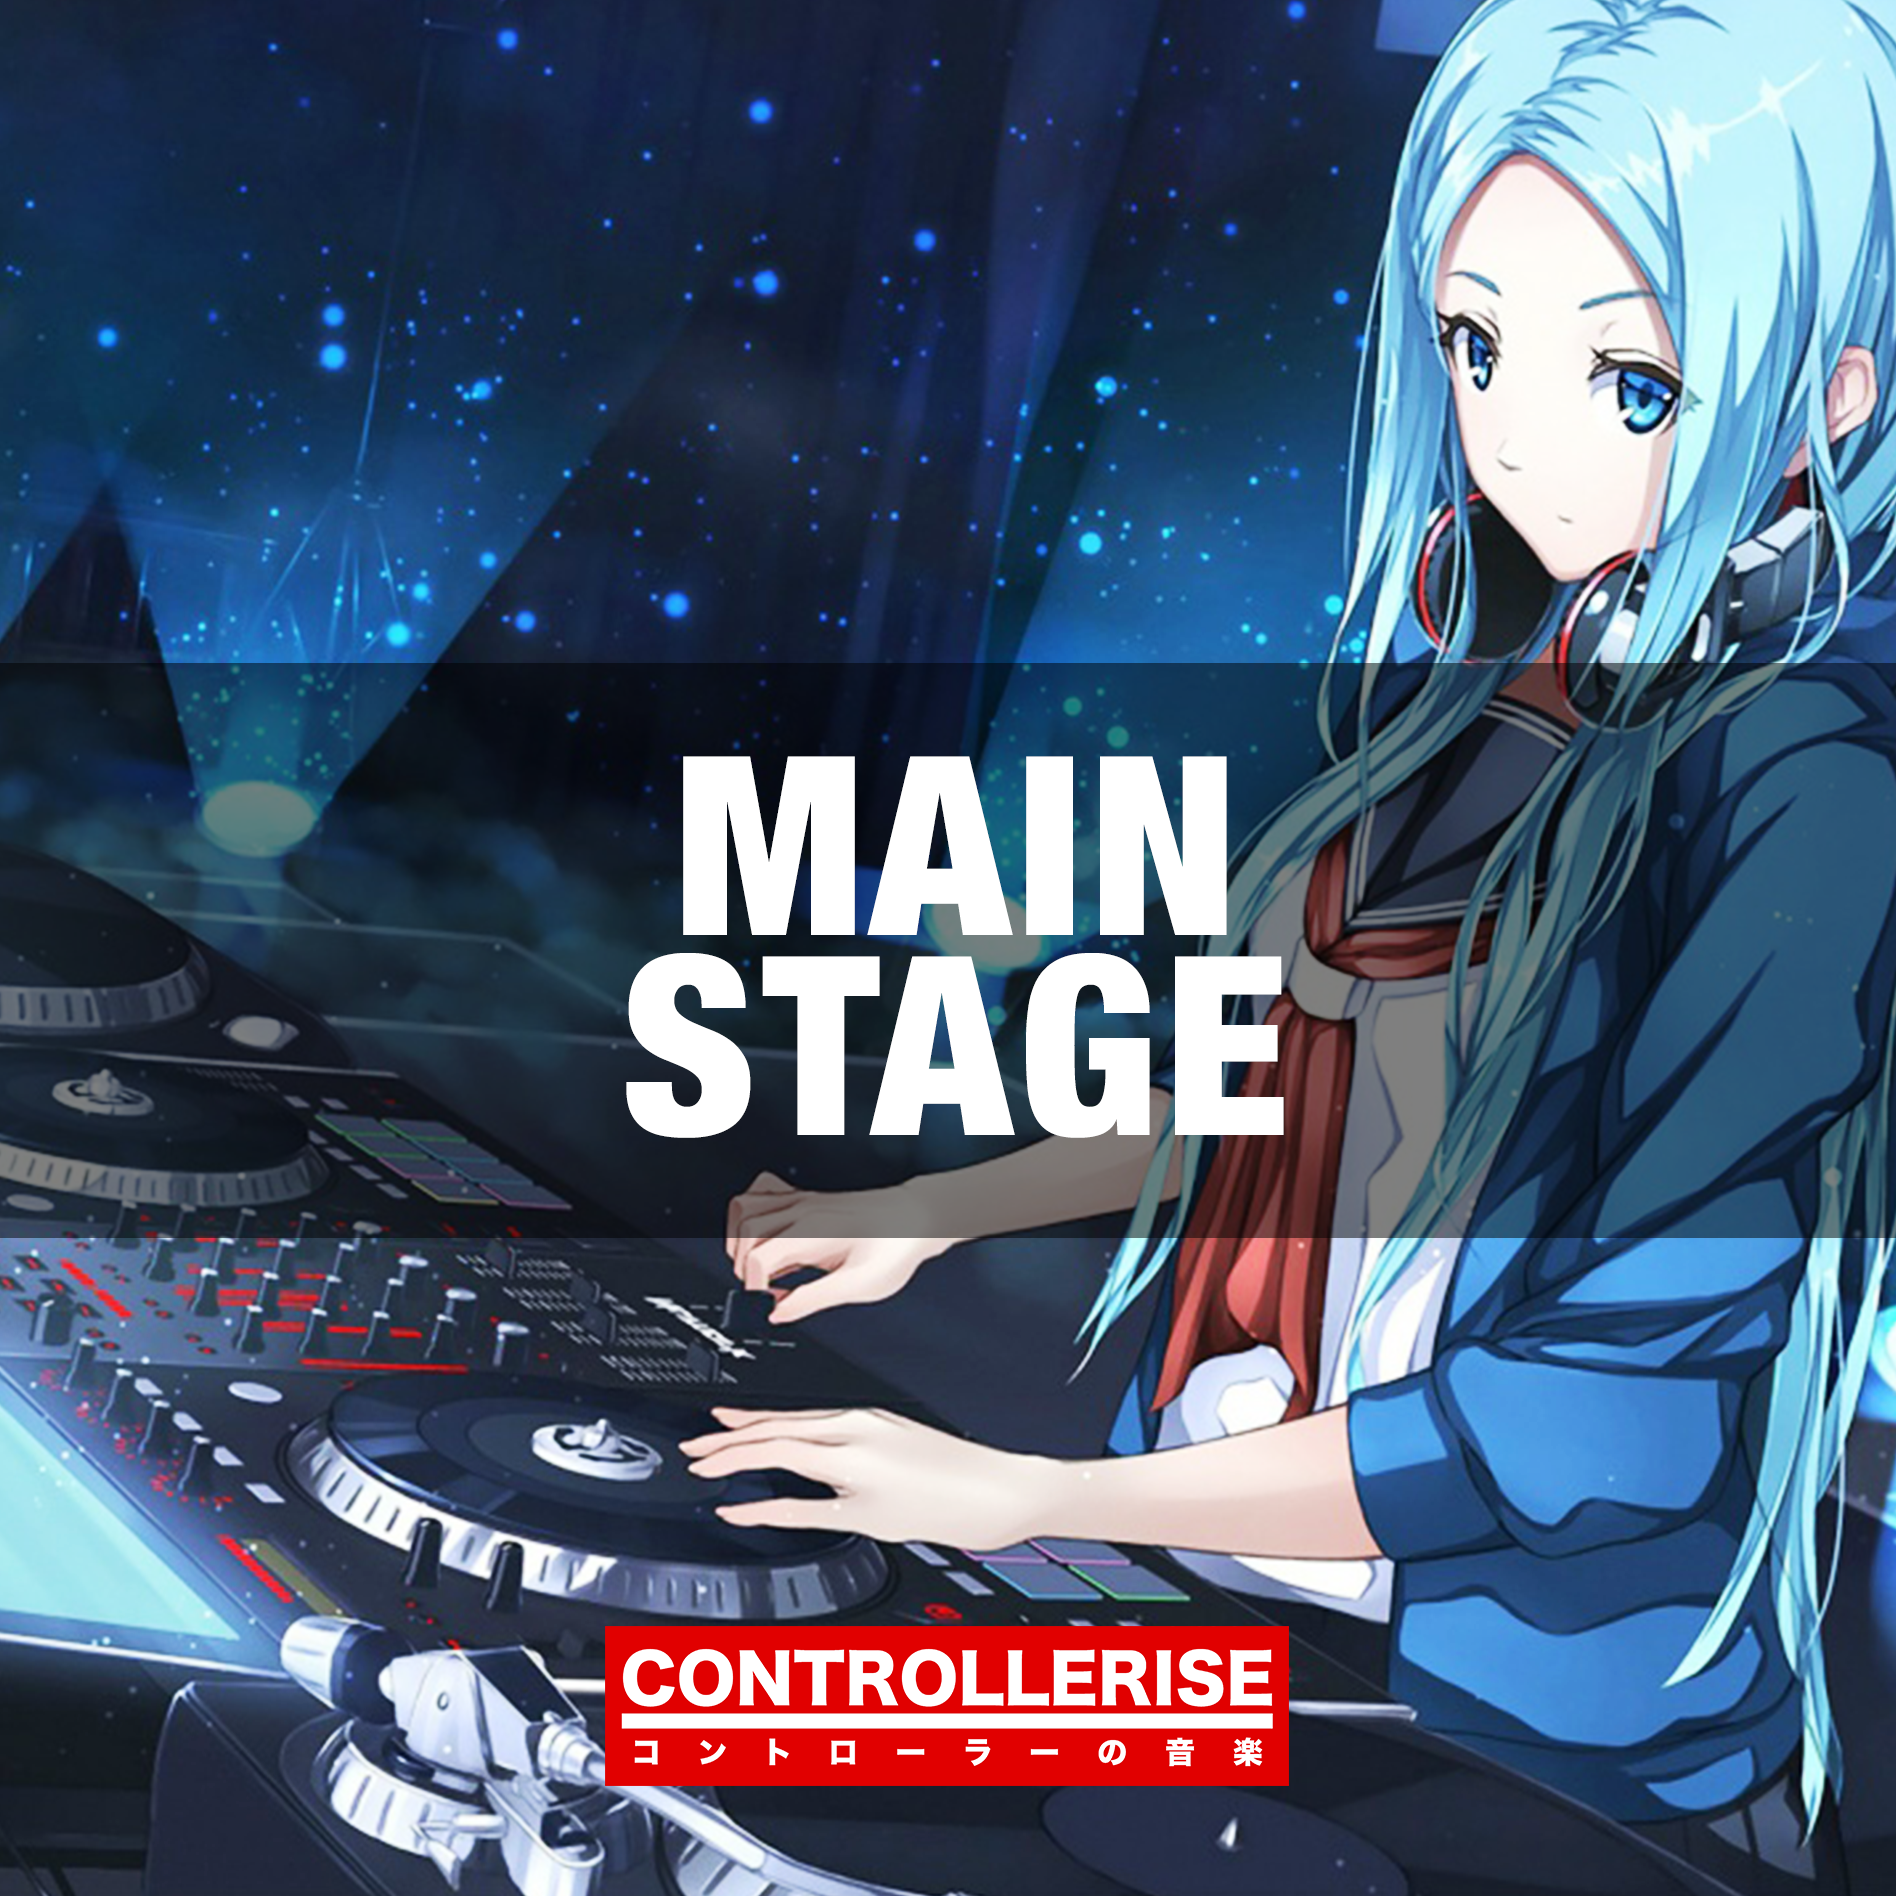 Main Stage presented by Controllerise